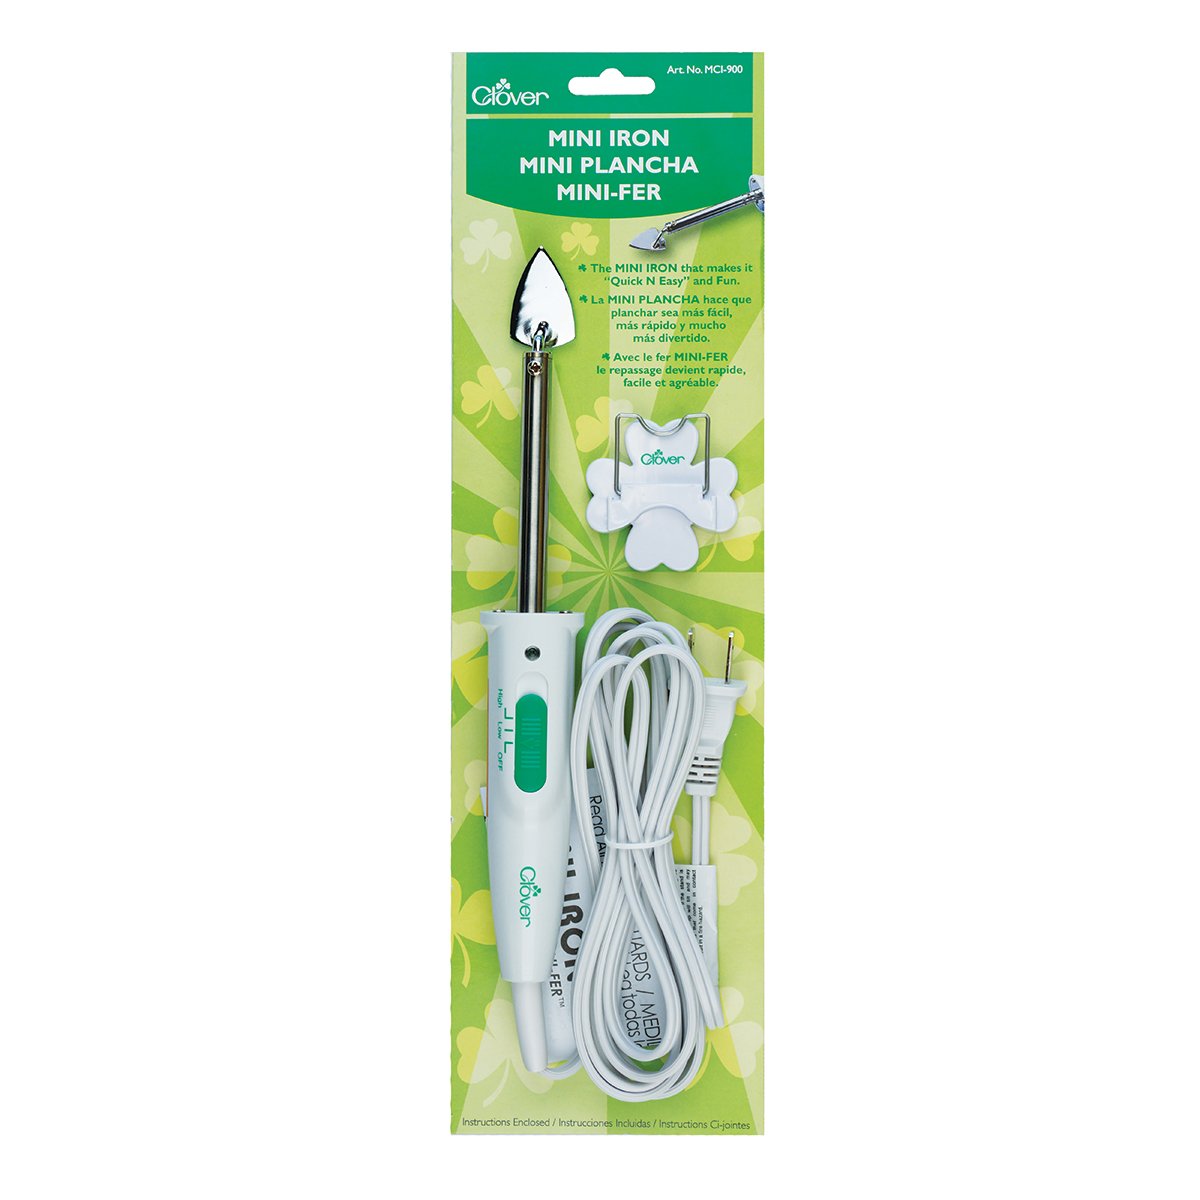 Clover Mini Iron for Sewing, Quilting & Crafting - arts & crafts